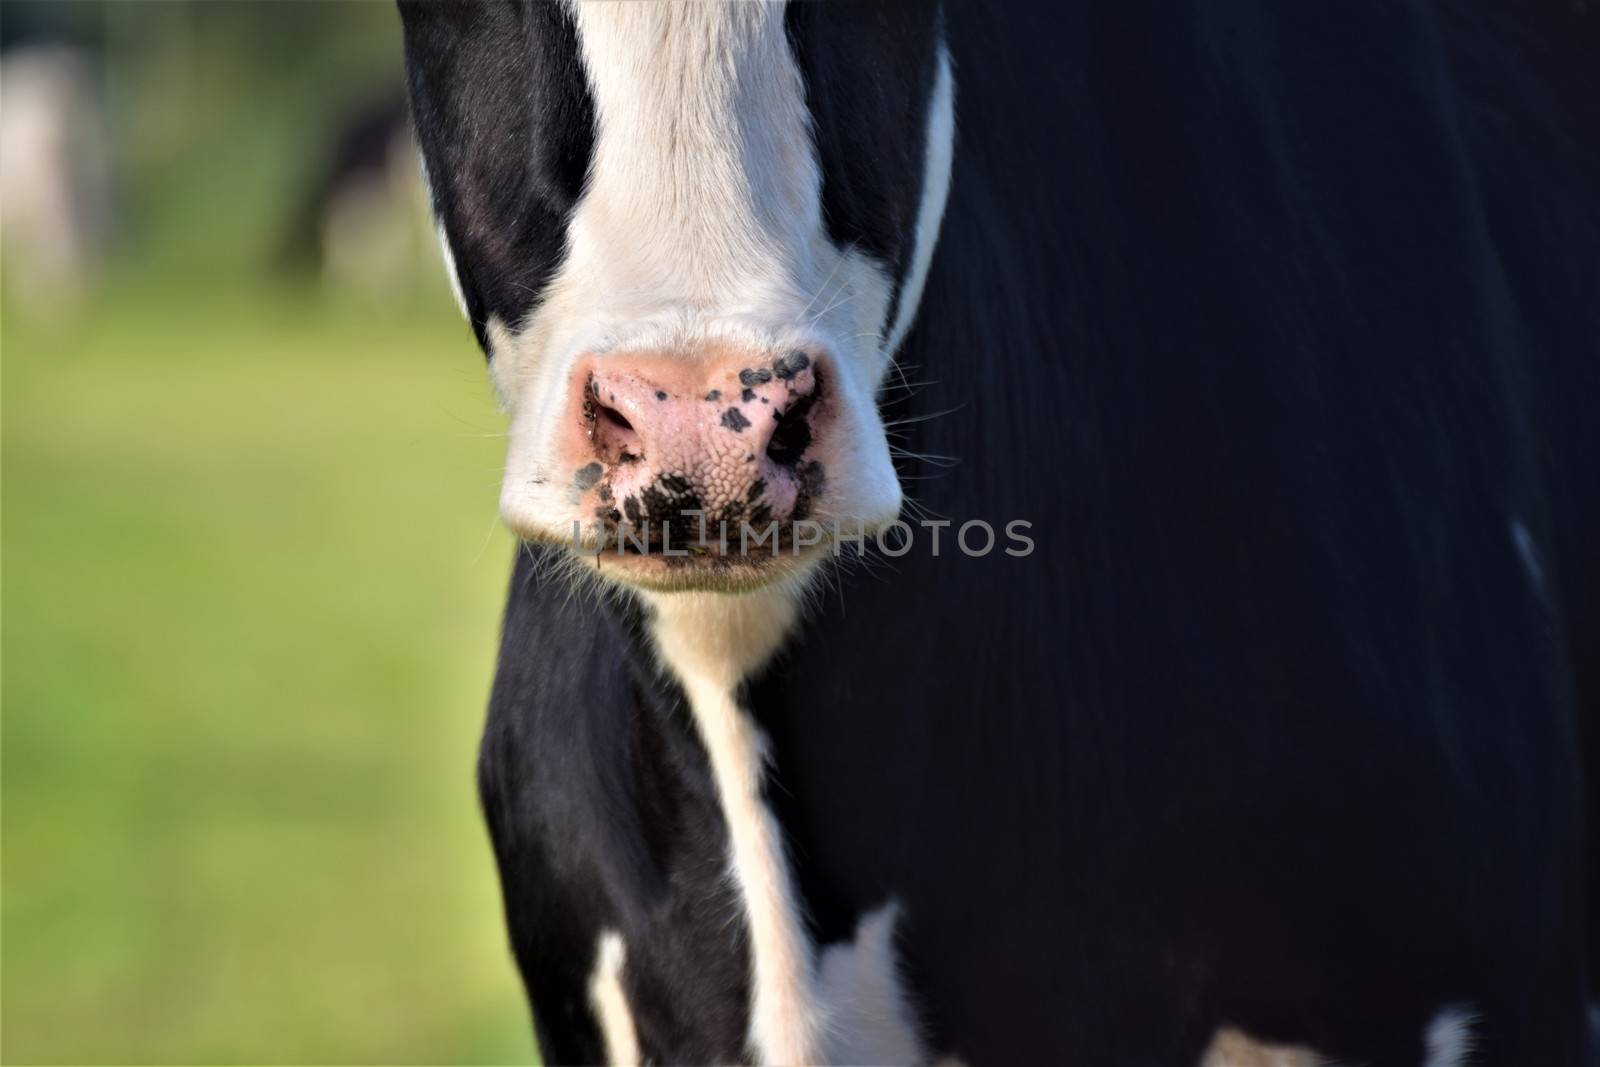 A close up of the nose of a cow against a green blurry backgound